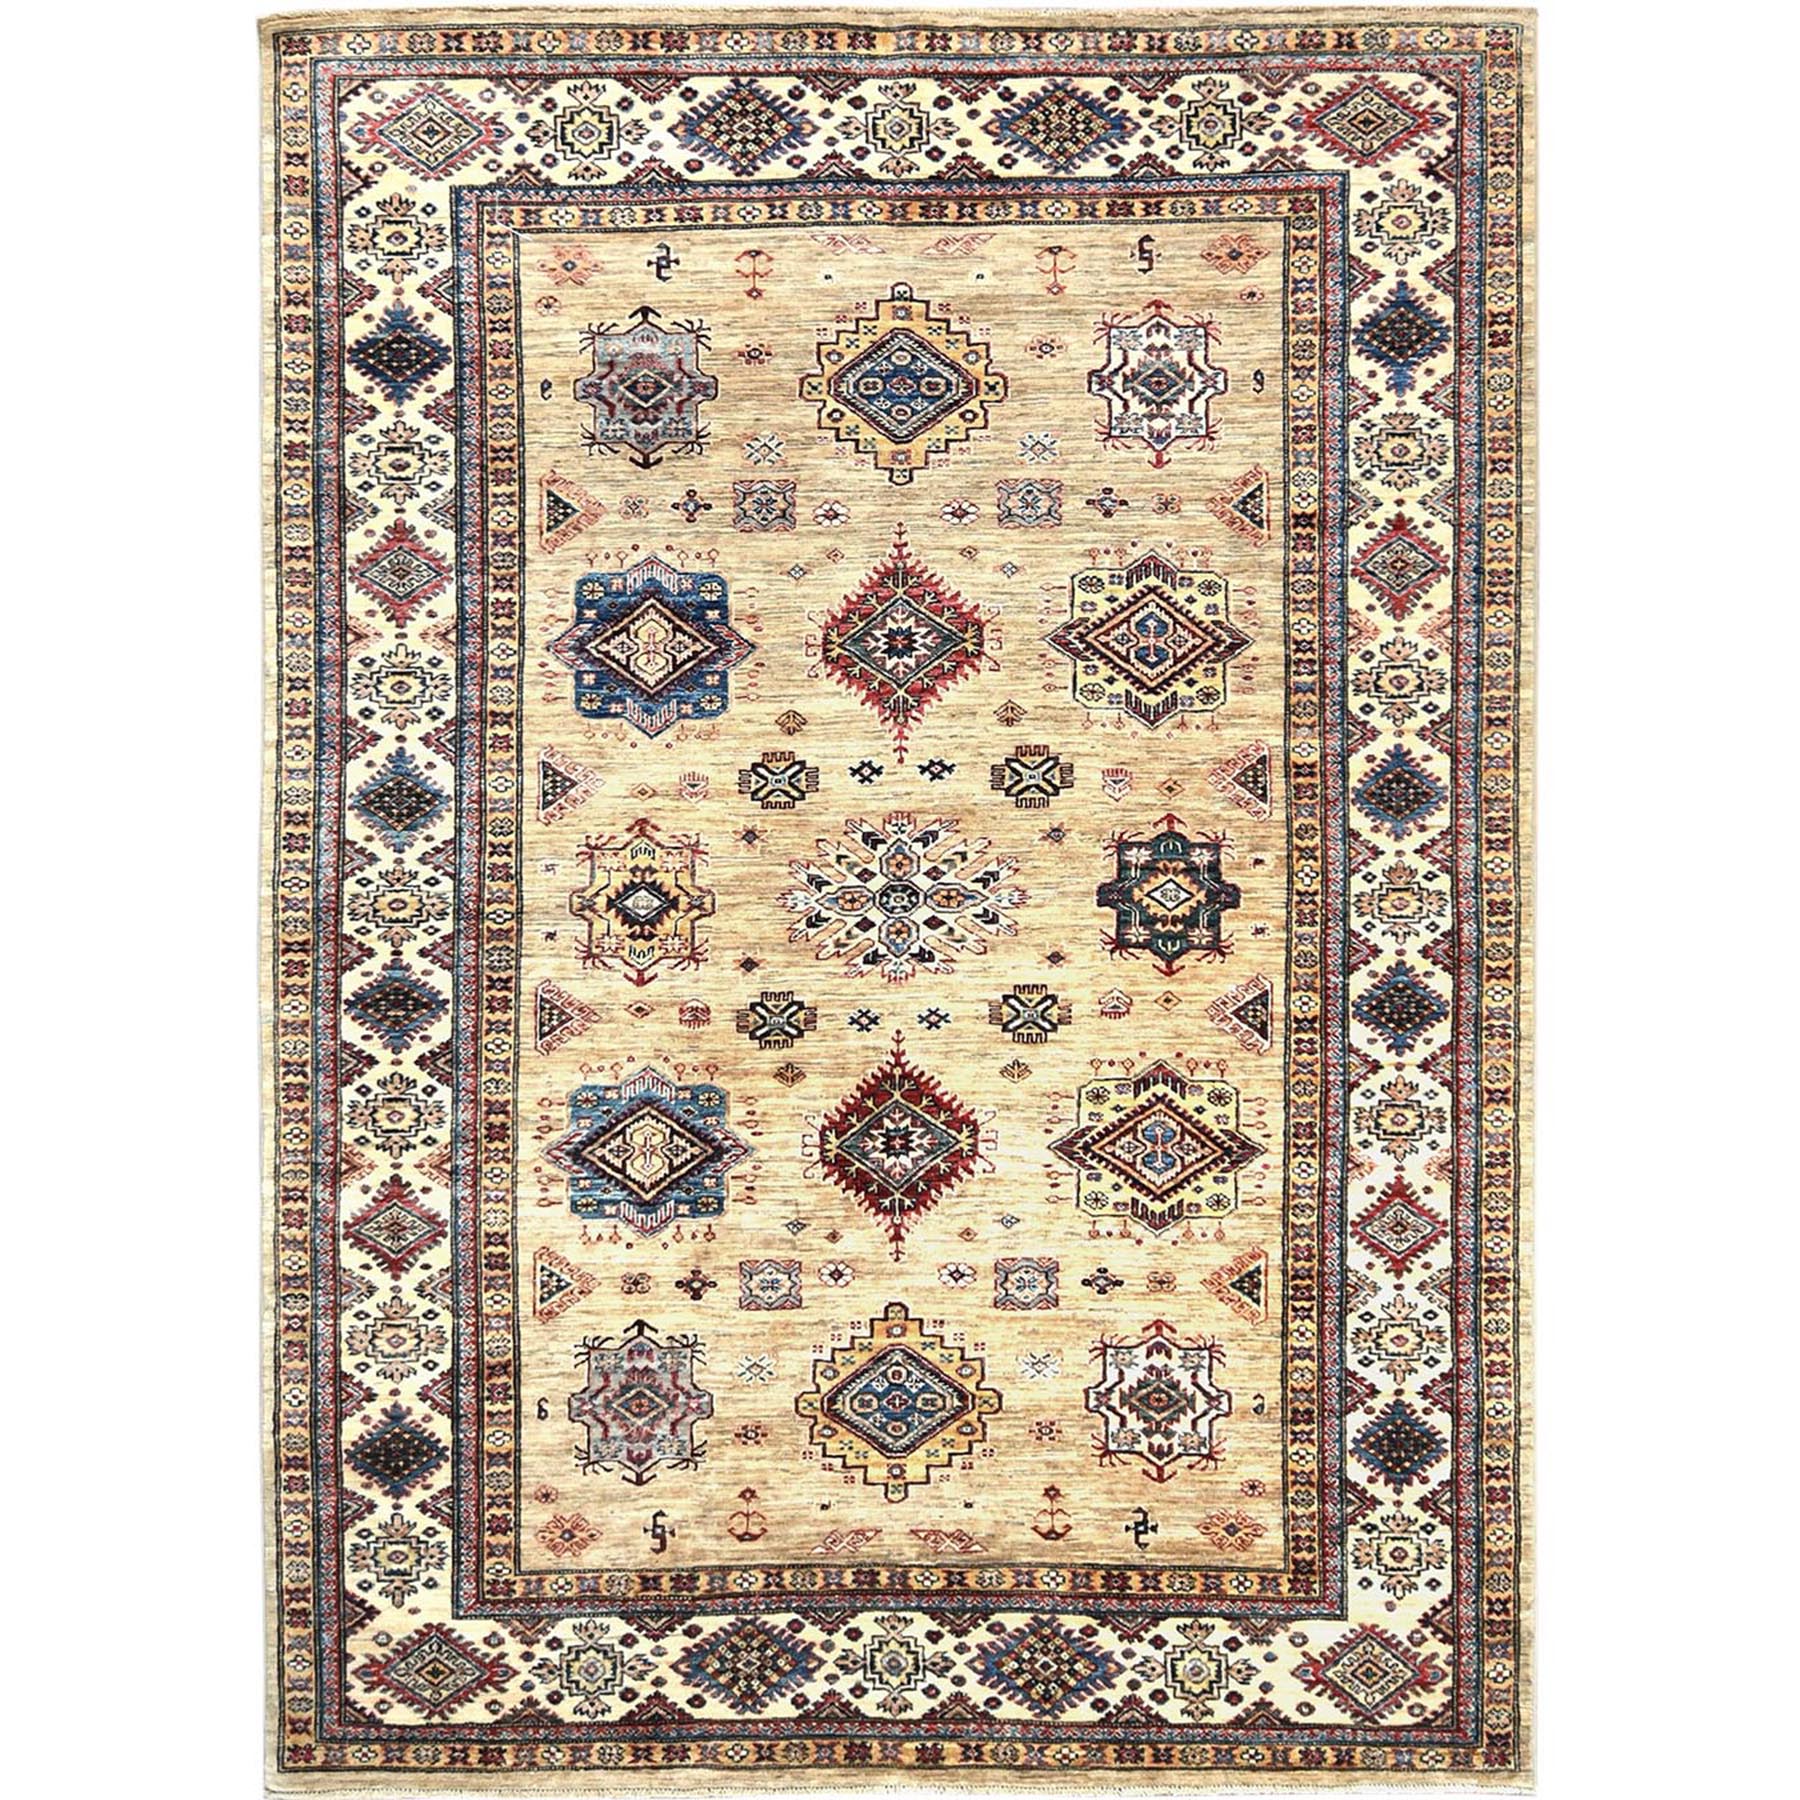  Wool Hand-Knotted Area Rug 6'1